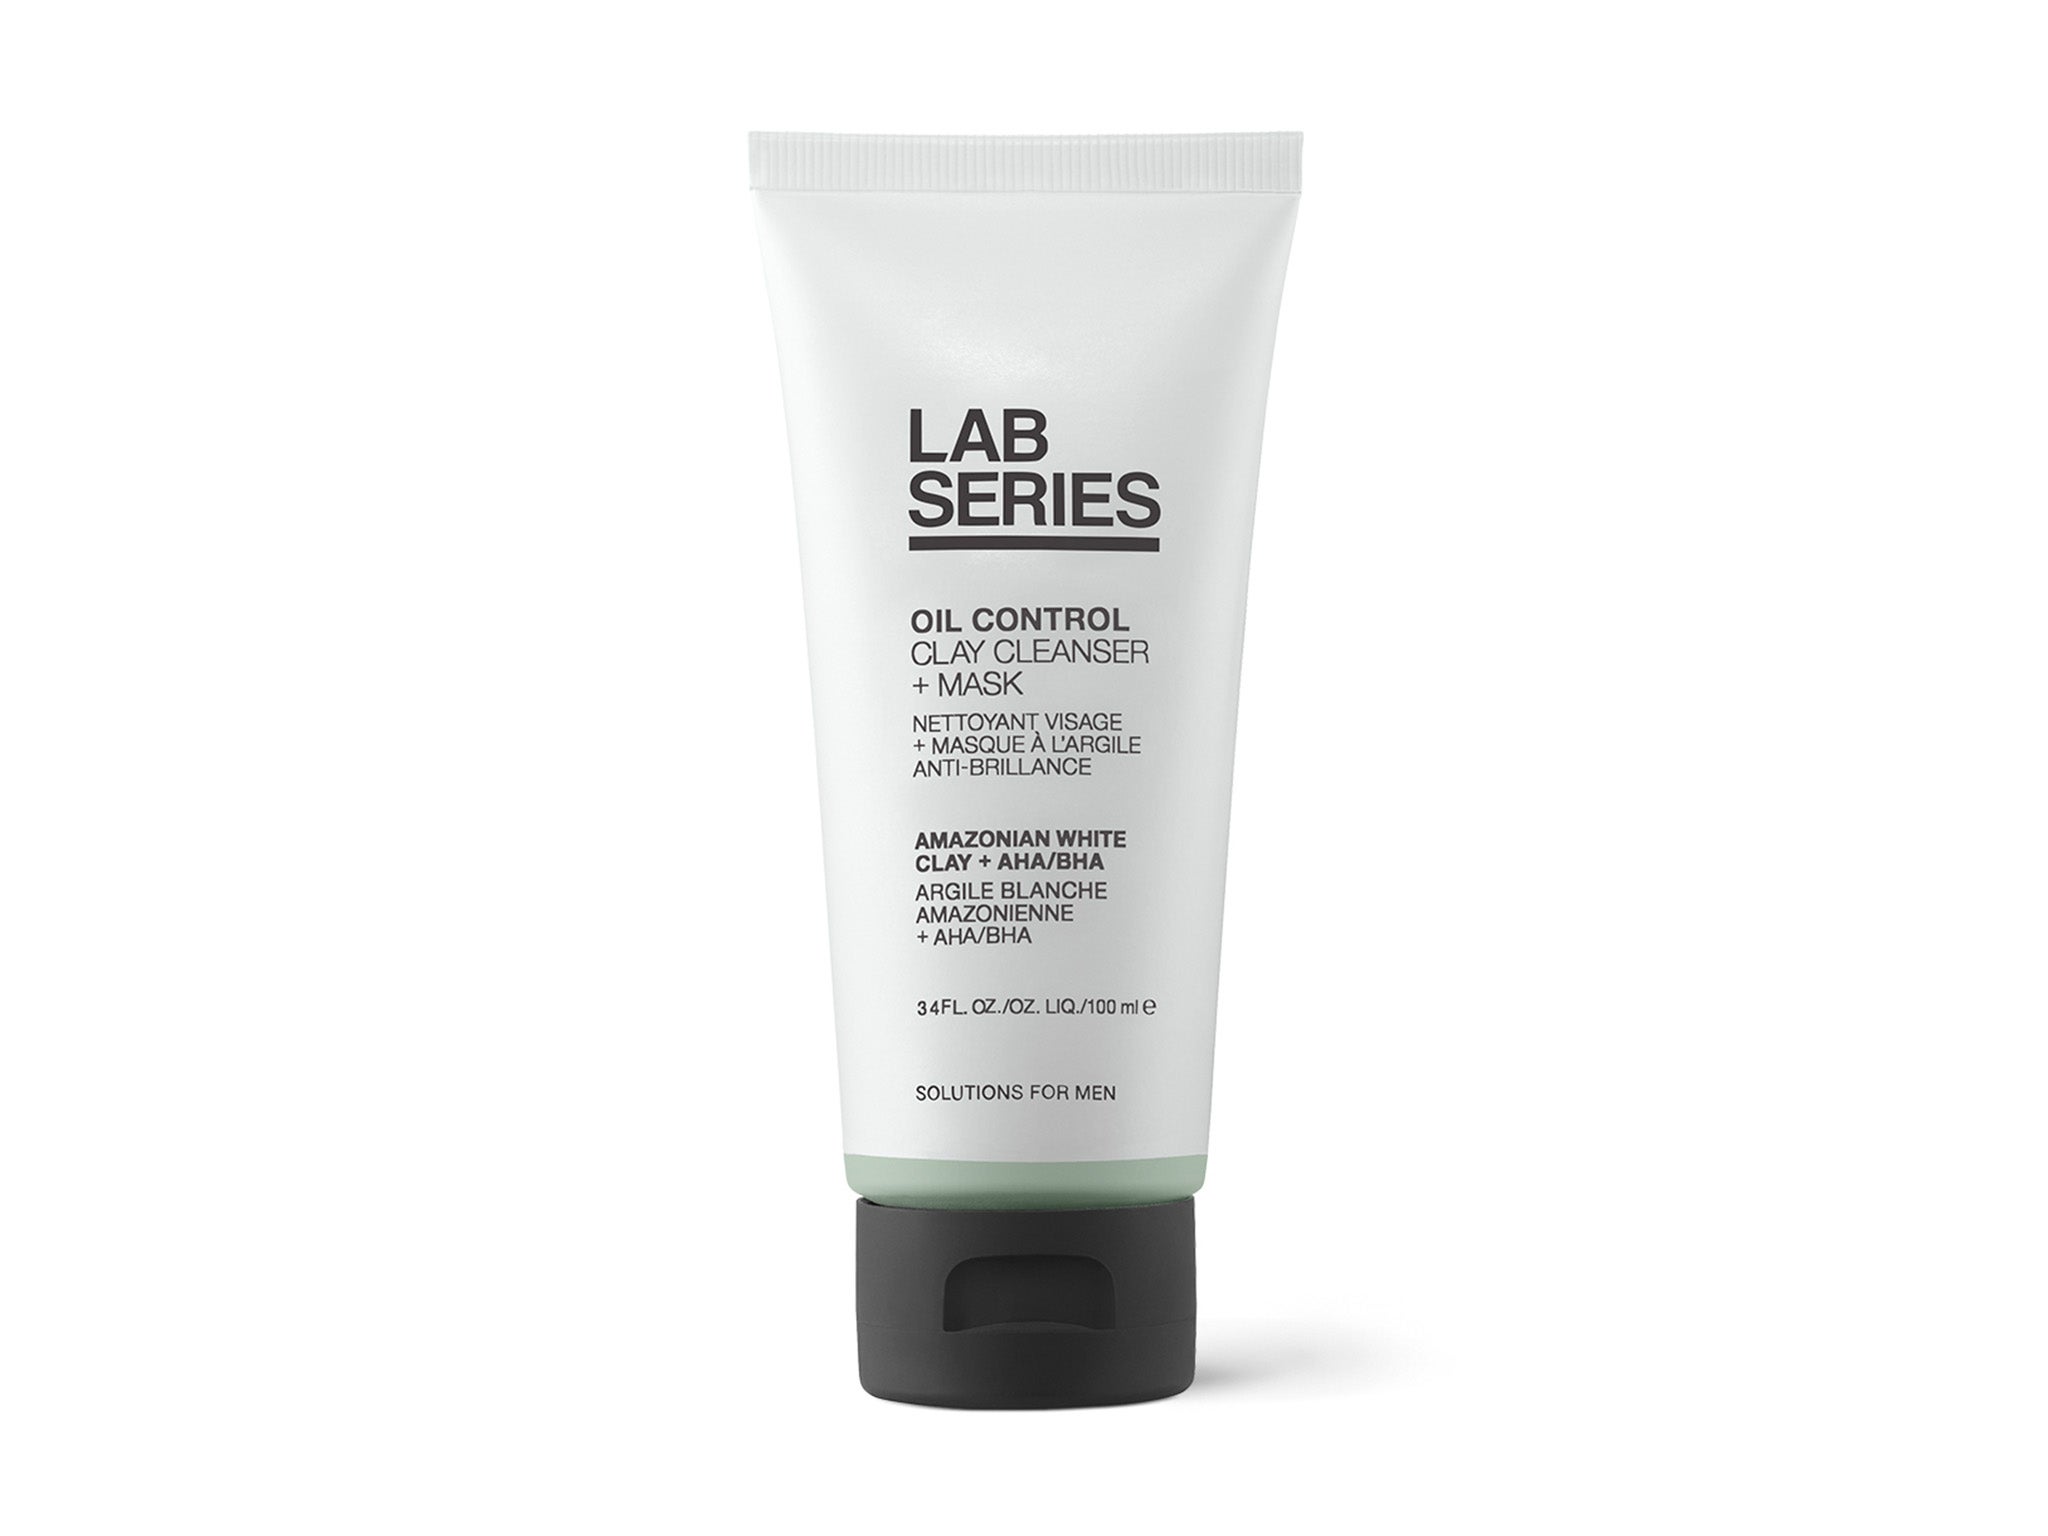 Lab Series oil control clay cleanser + mask .jpg